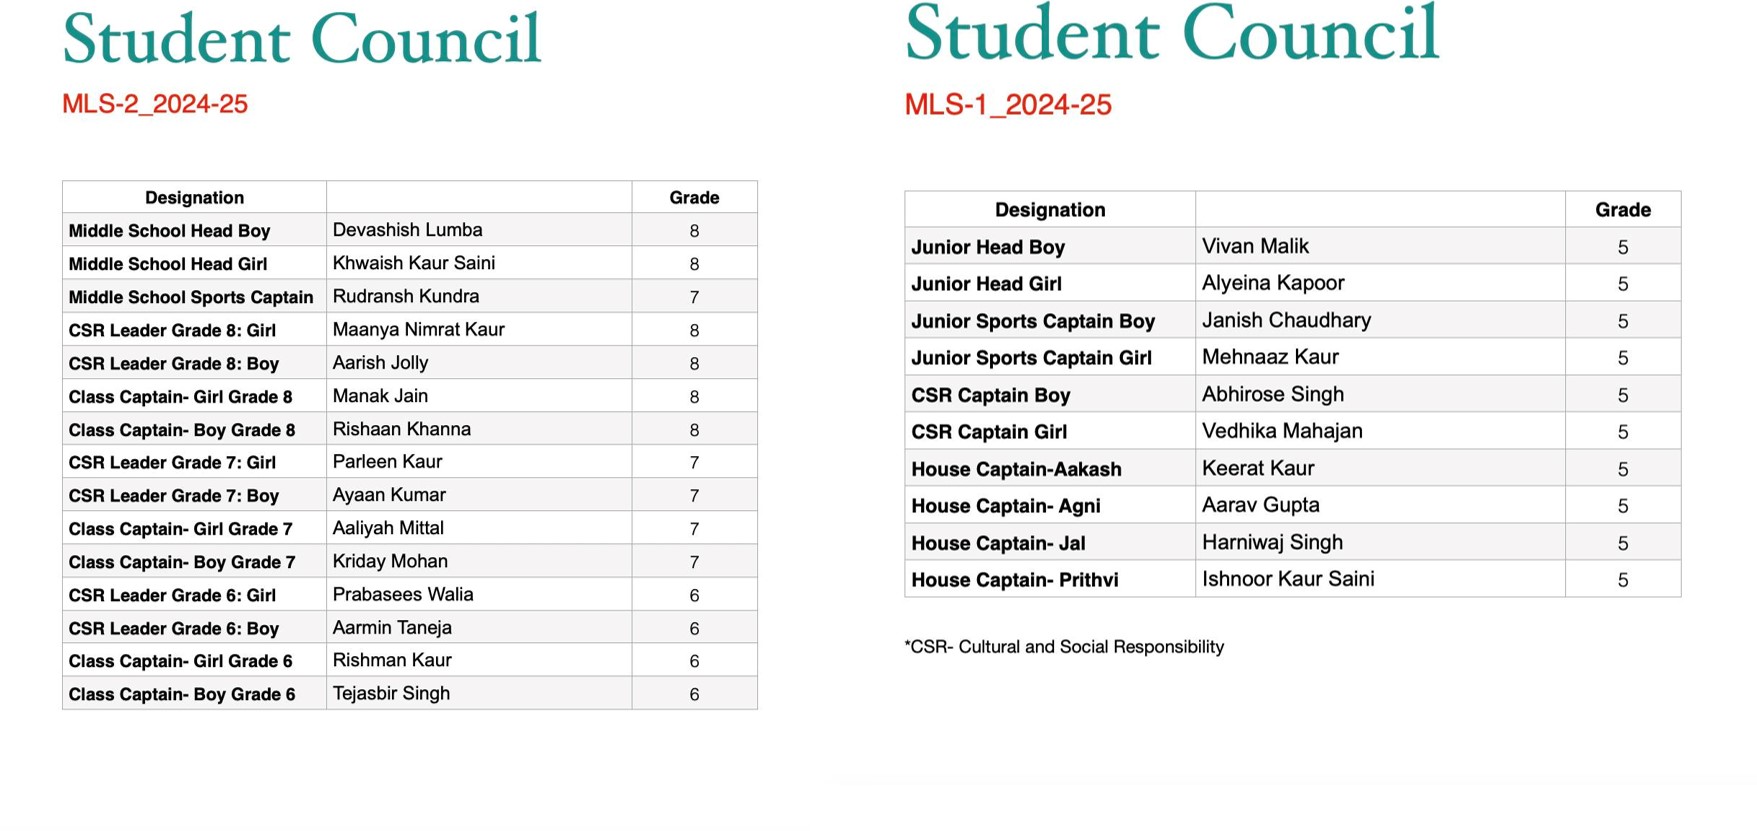 Student council Results( MLS 1 and 2)